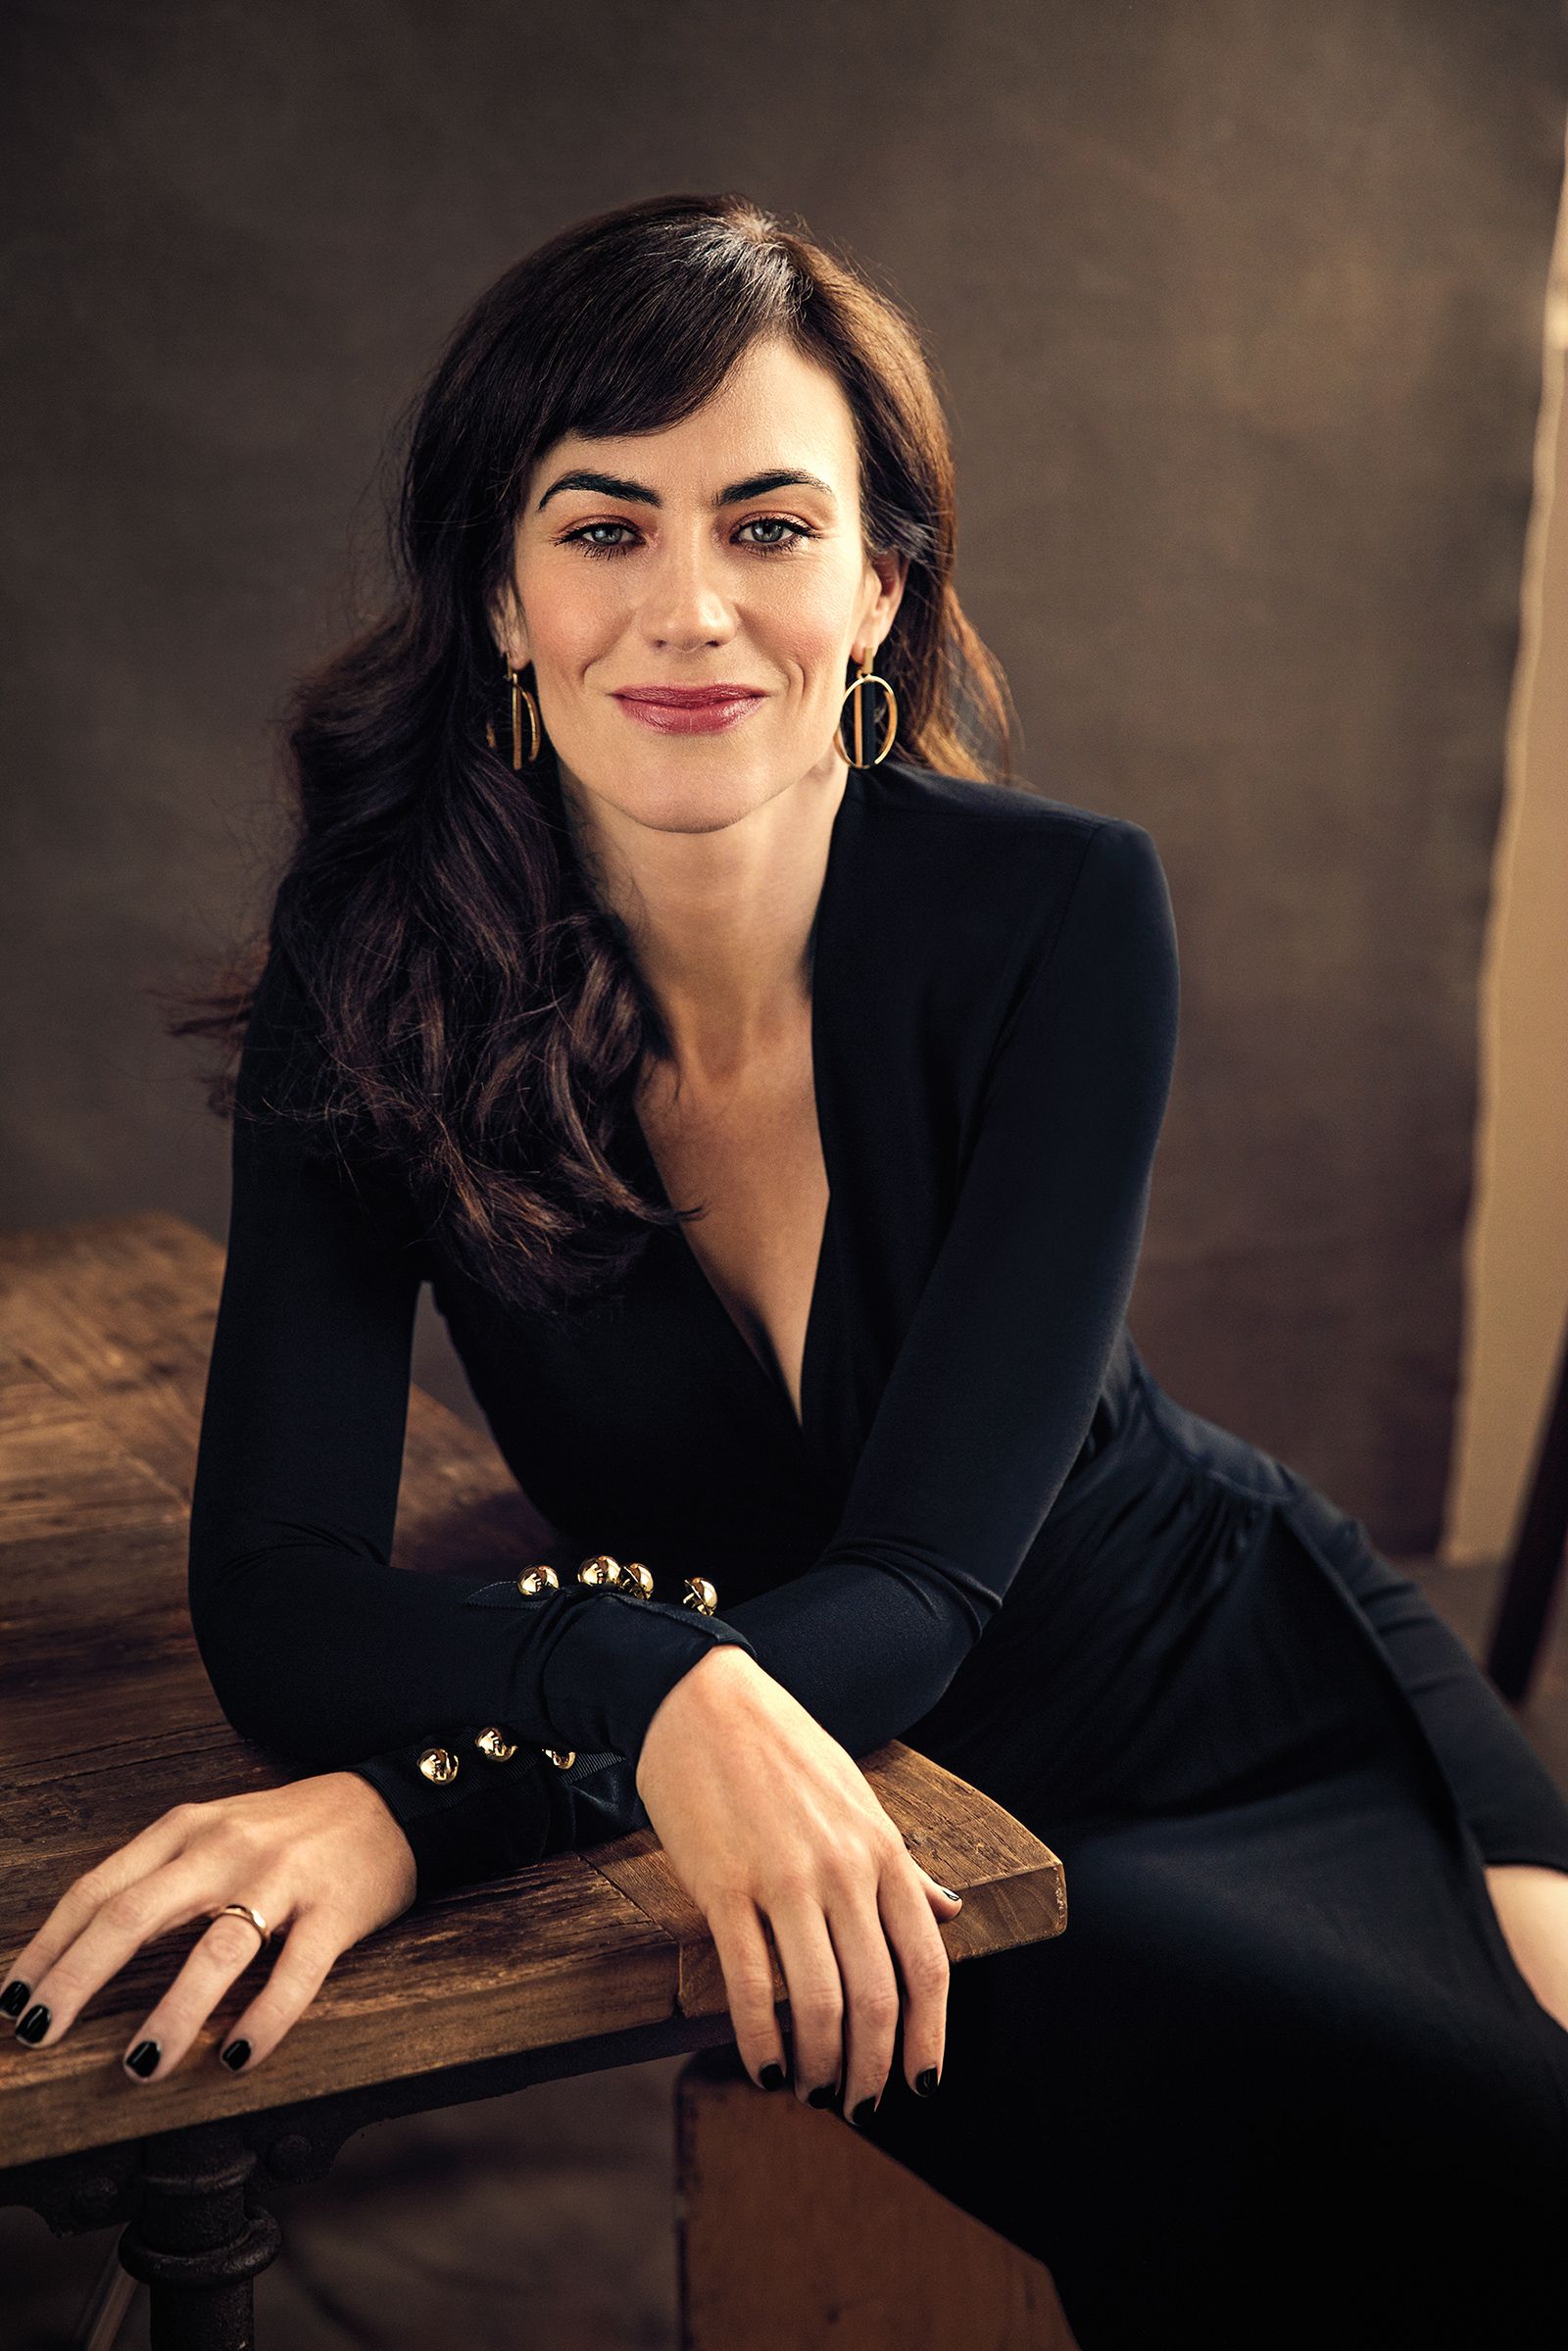 Maggie Siff. Mulher executiva, Mulher, Mulheres